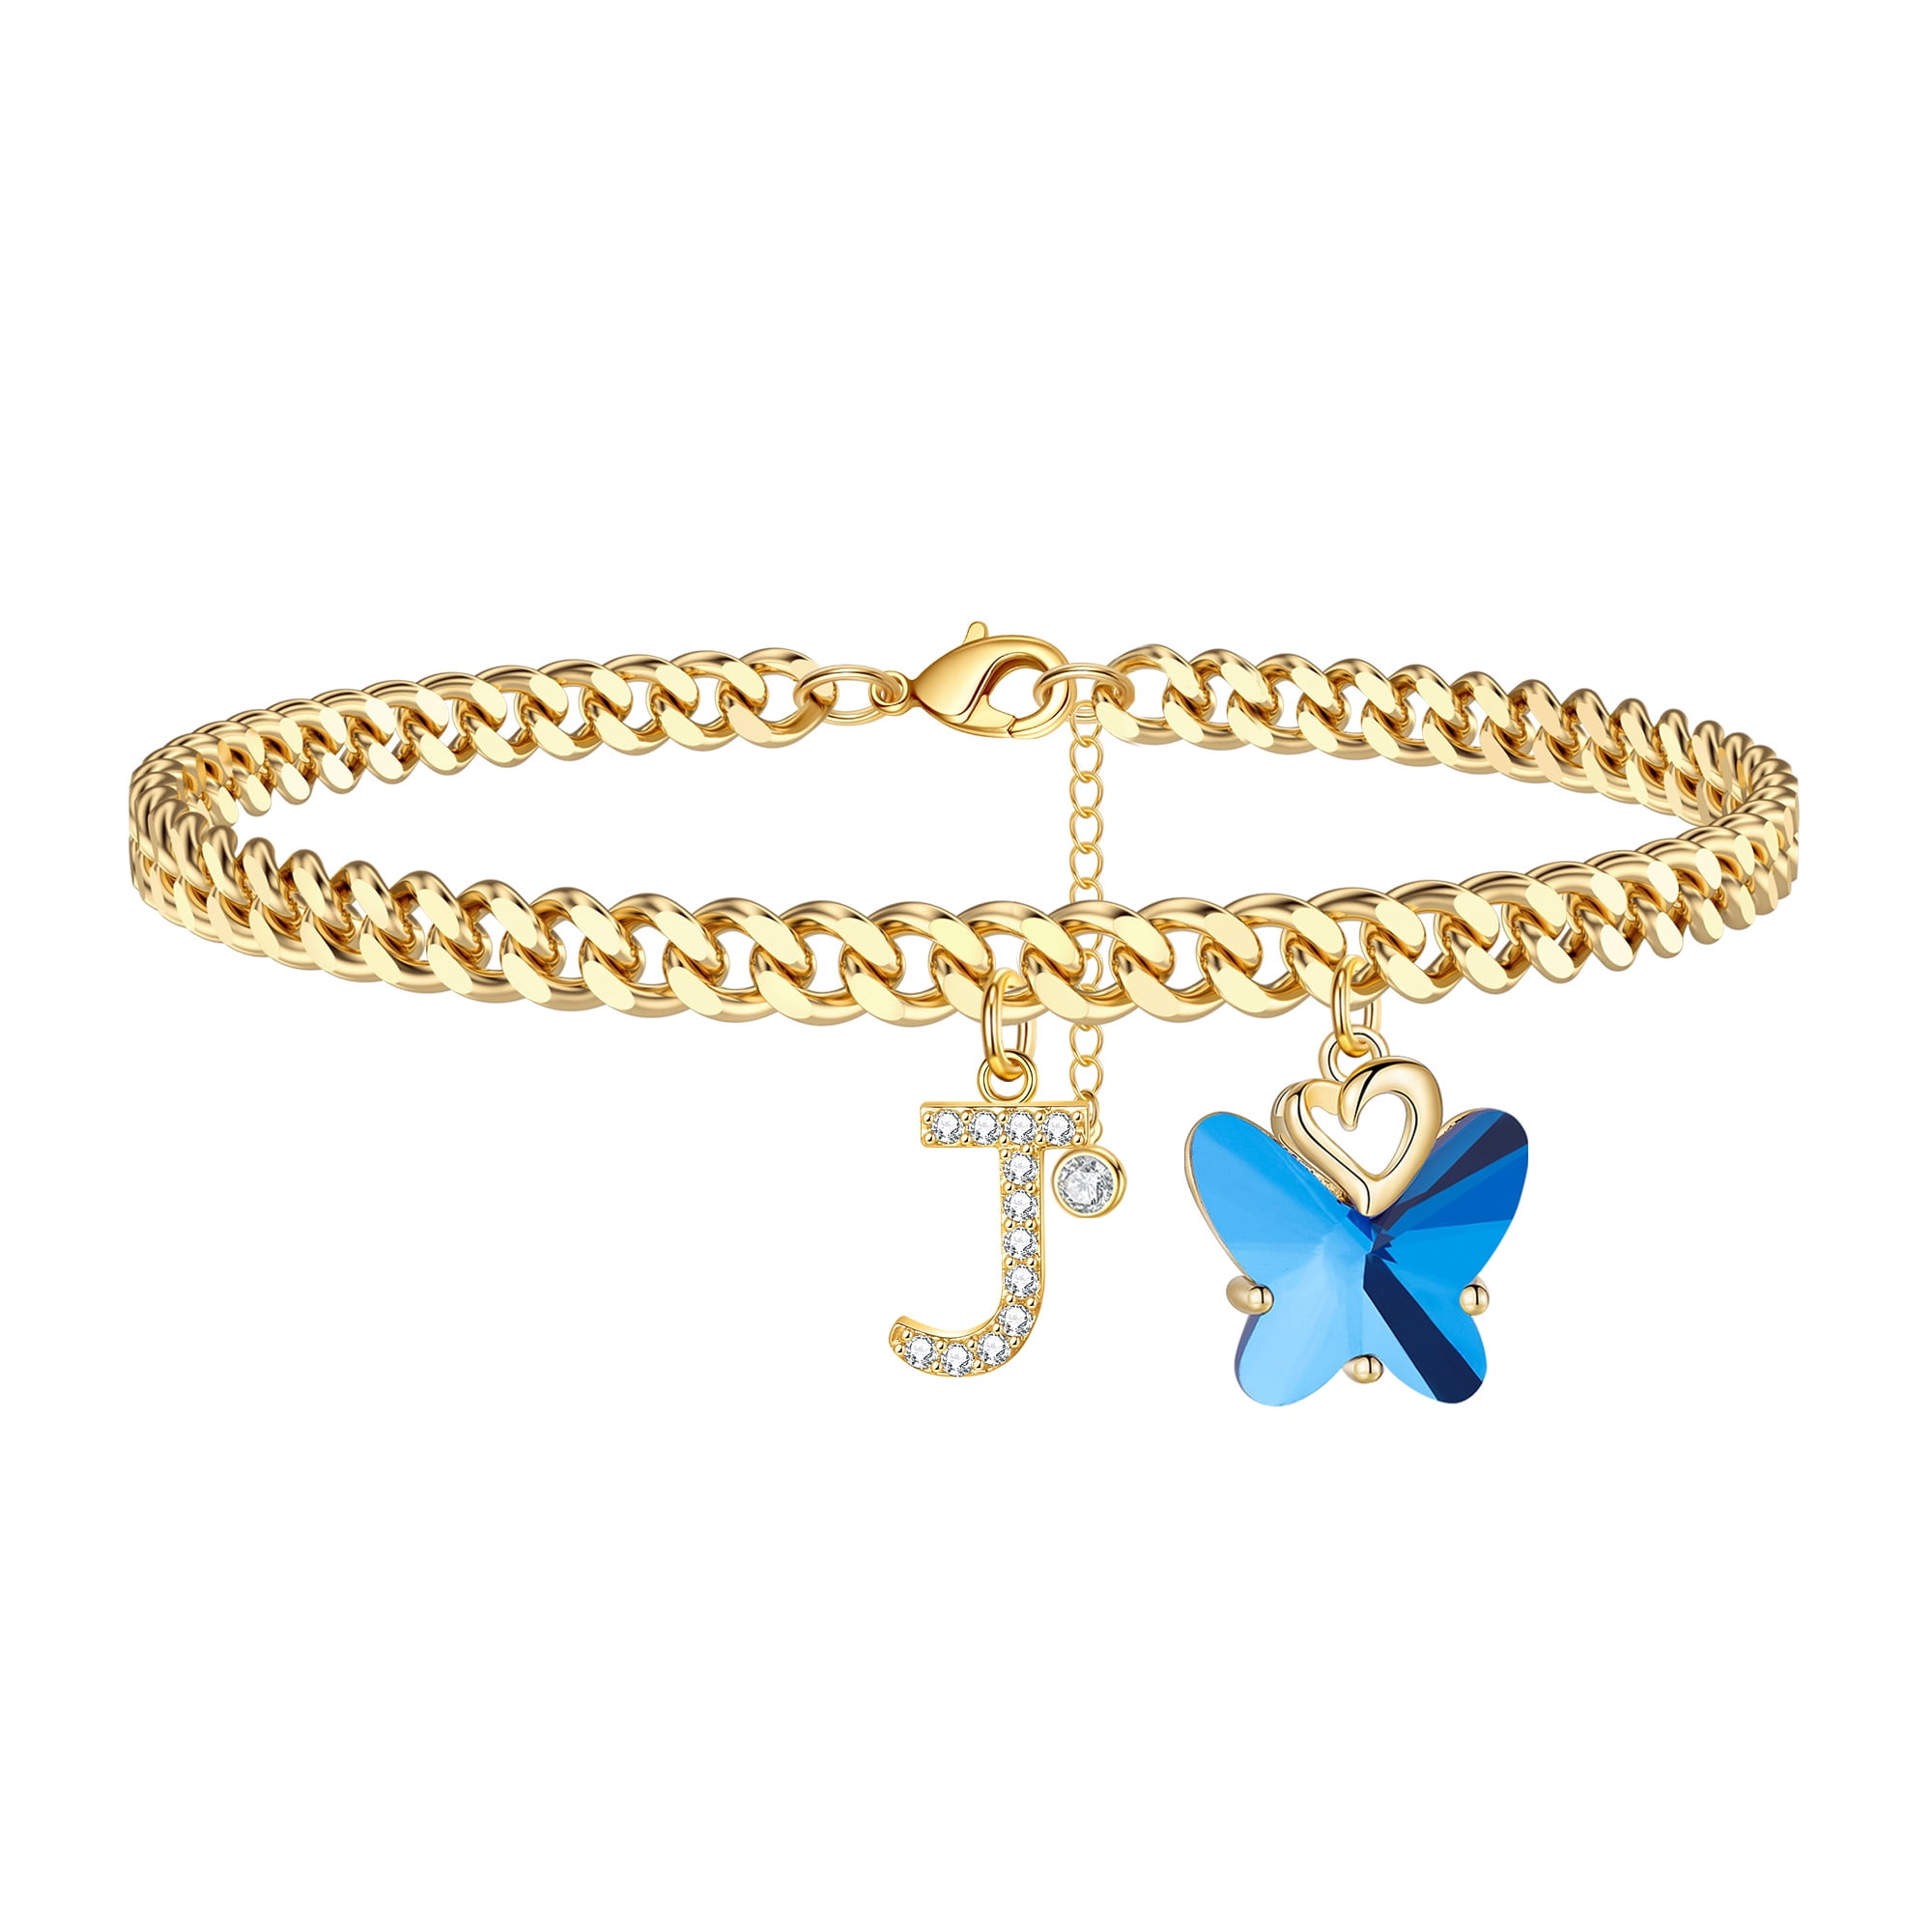 Wowshow 14K Gold Plated Anklet with Initial Heart Pendent Flat Marina Letter Anklet for Women Girls A-Z 